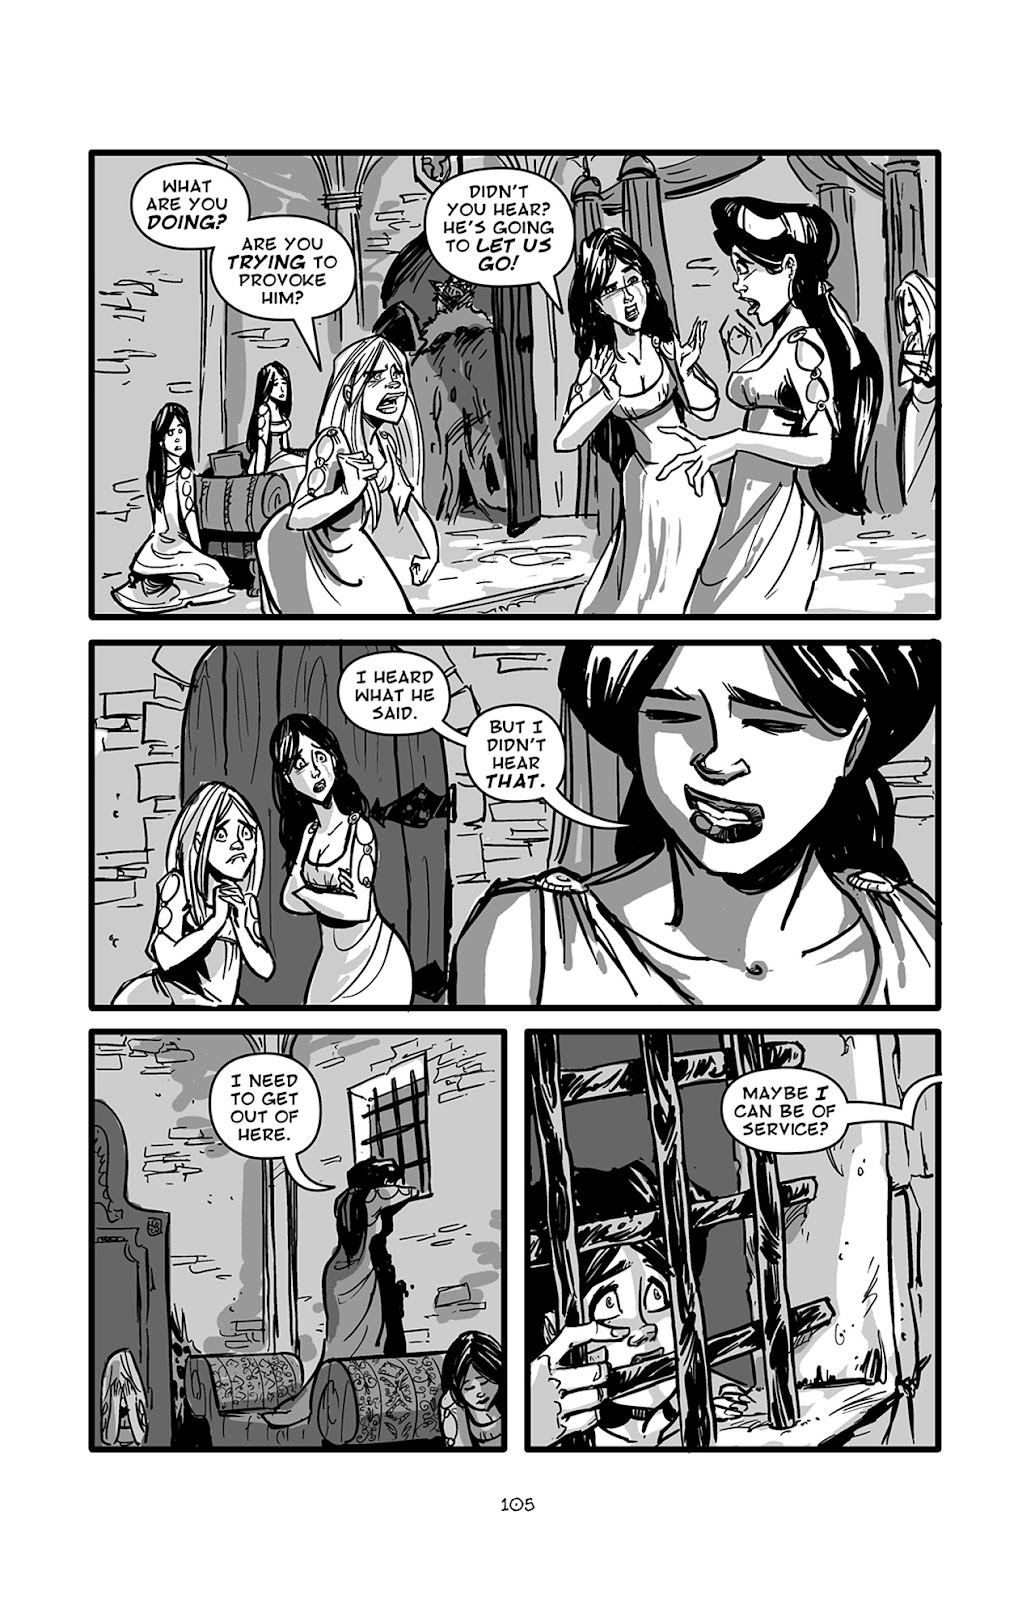 Pinocchio: Vampire Slayer - Of Wood and Blood issue 5 - Page 6